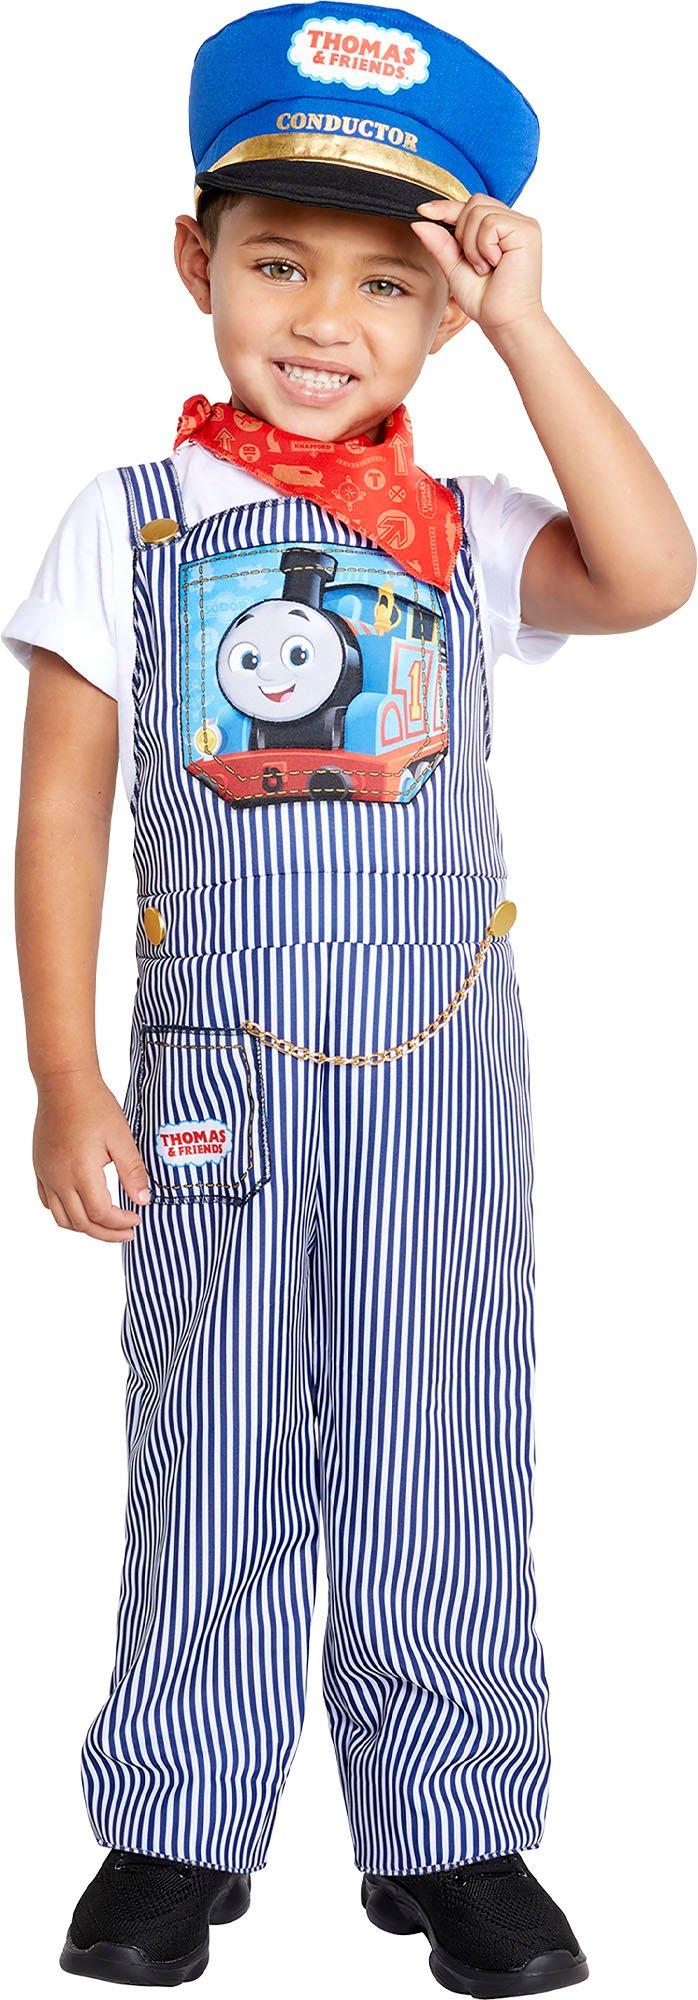 Kids' Conductor Costume - Thomas & Friends